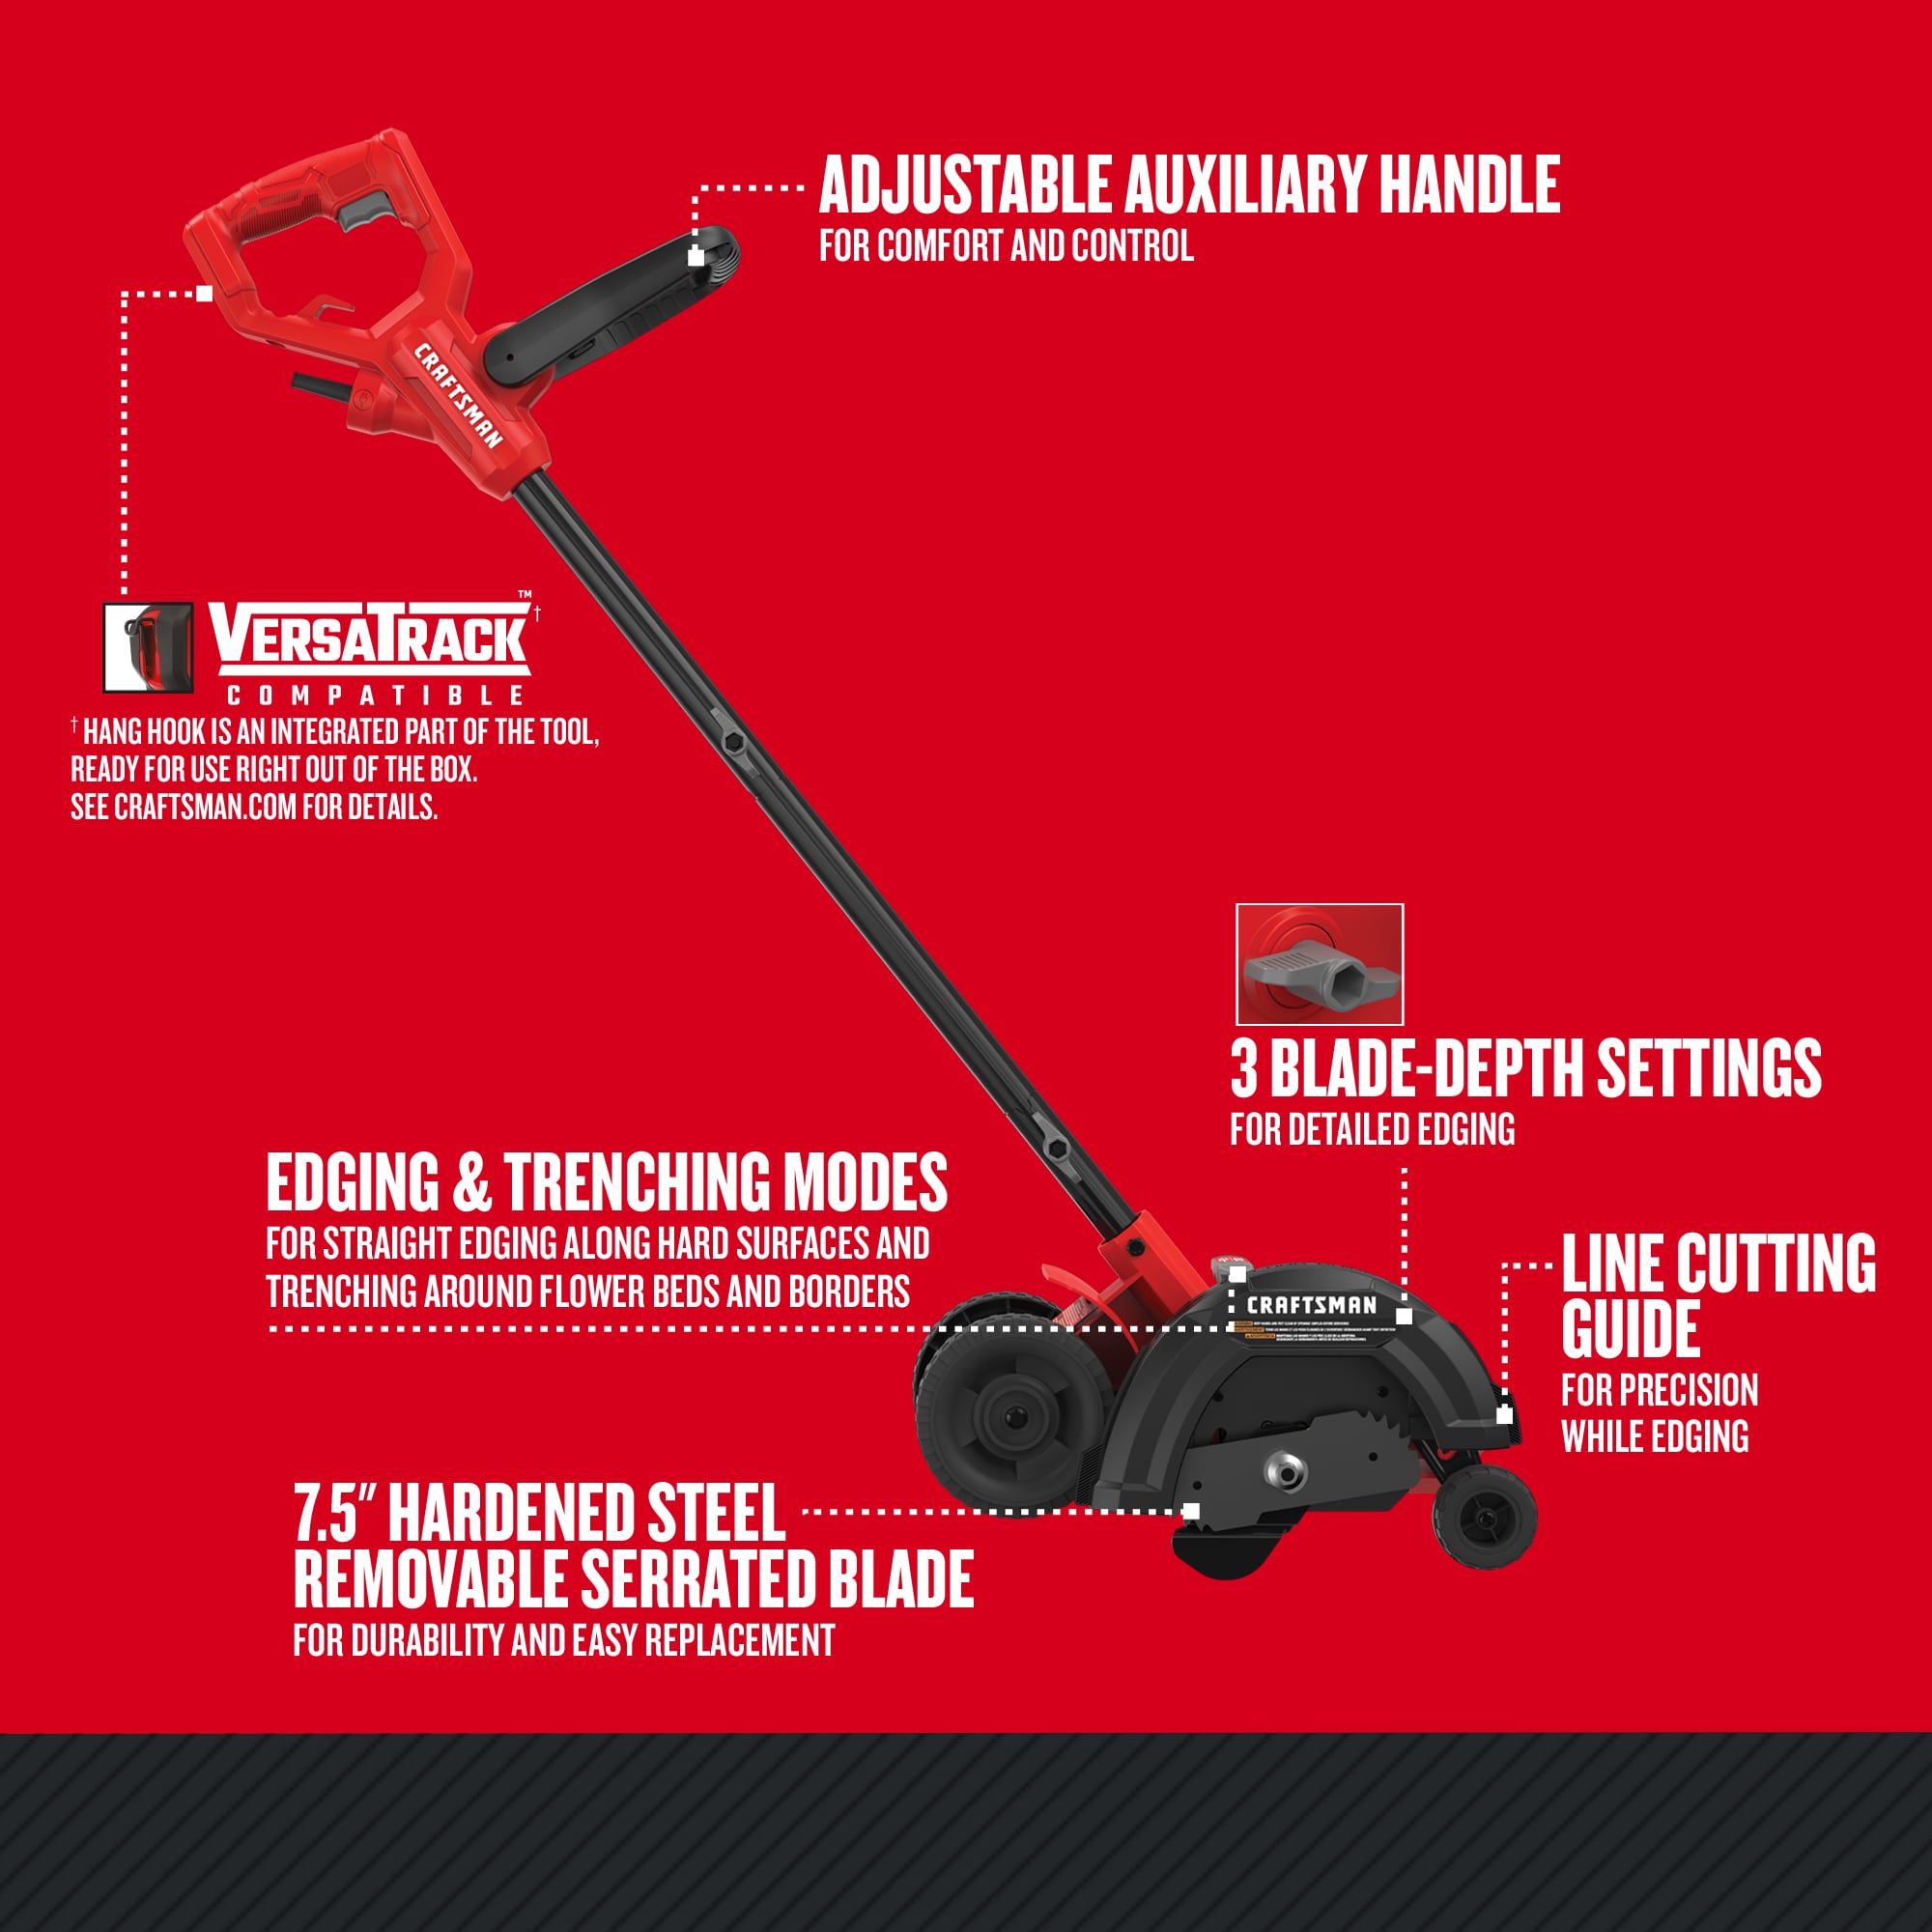 https://discounttoday.net/wp-content/uploads/2022/09/CRAFTSMAN-CMEED400-7.5-in-Push-Walk-Behind-Electric-Lawn-Edger1.jpg